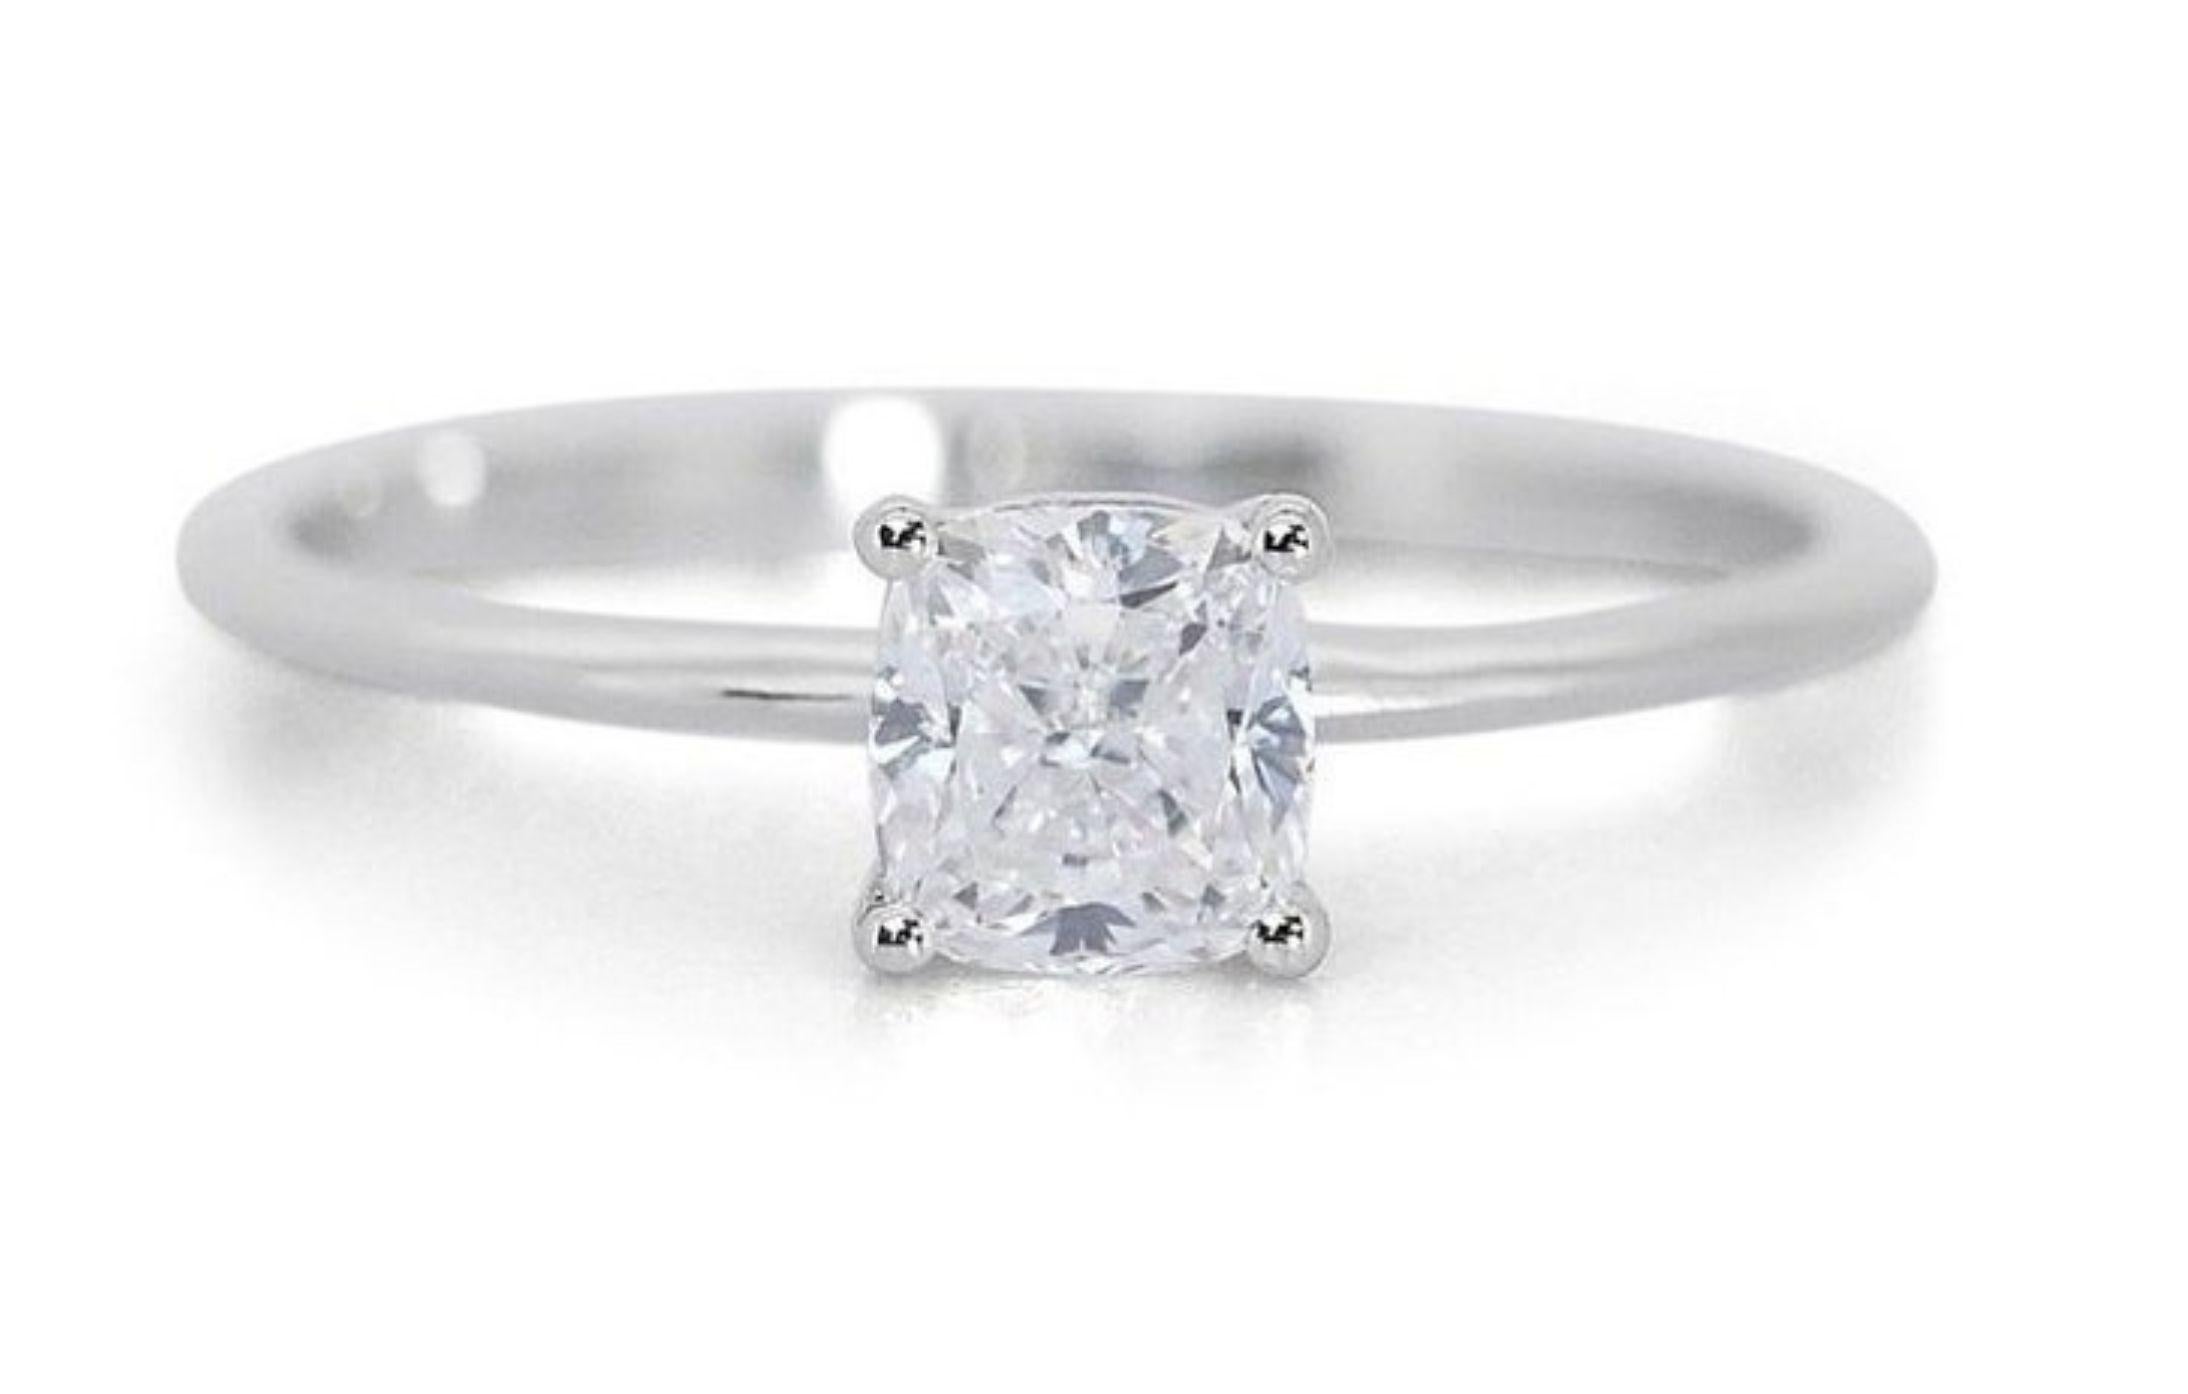 Own a Dazzling Dream: 1.52 Carat Cushion Modified Diamond Ring in 18K White Gold (GIA Certified)

Captivate all eyes with the brilliance of this stunning ring, featuring a breathtaking 1.52 carat cushion modified diamond. This exquisite piece is